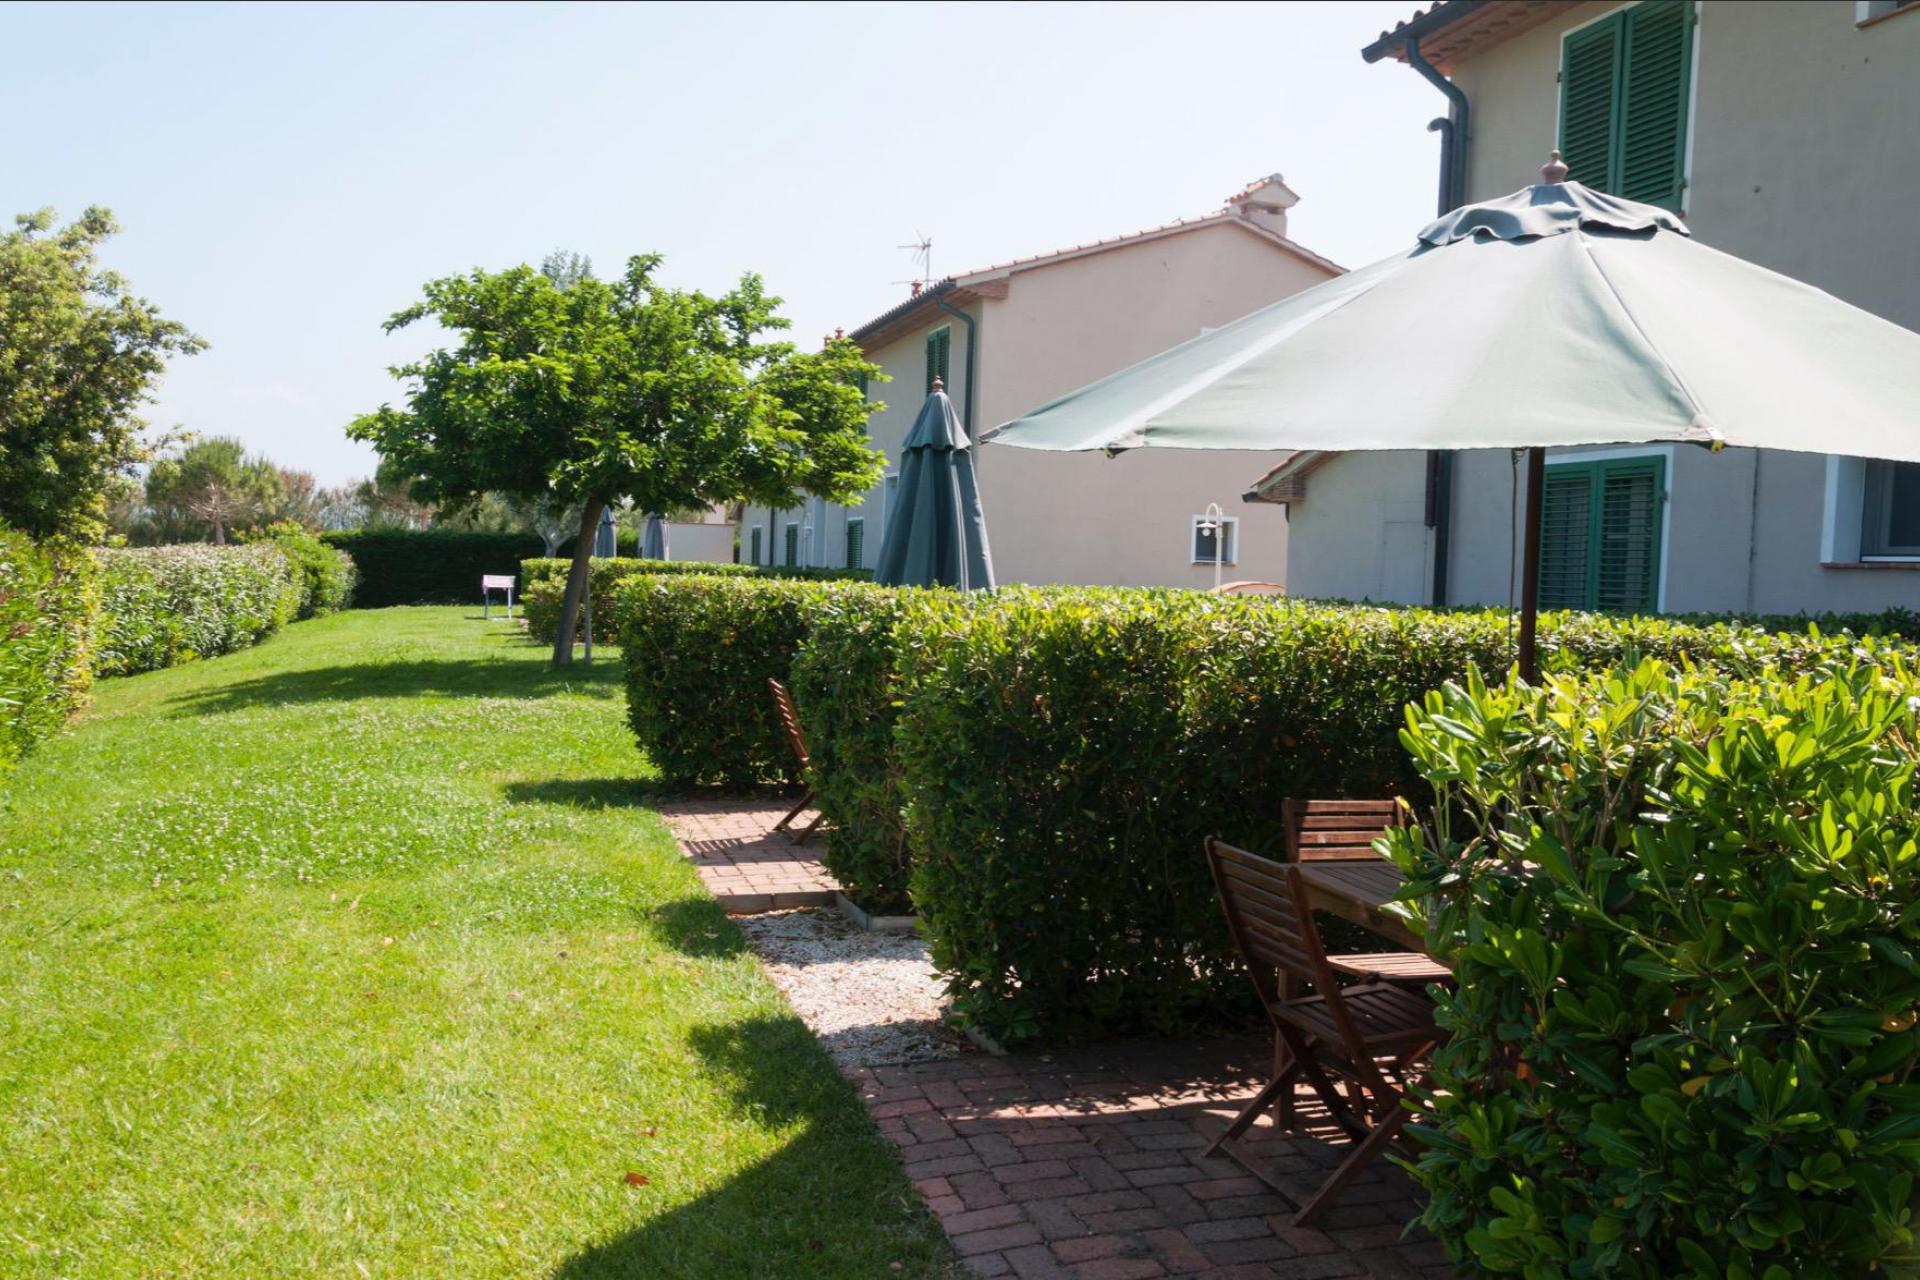 Agriturismo Tuscany Cosy agriturismo 800 meters from the Tuscan coast